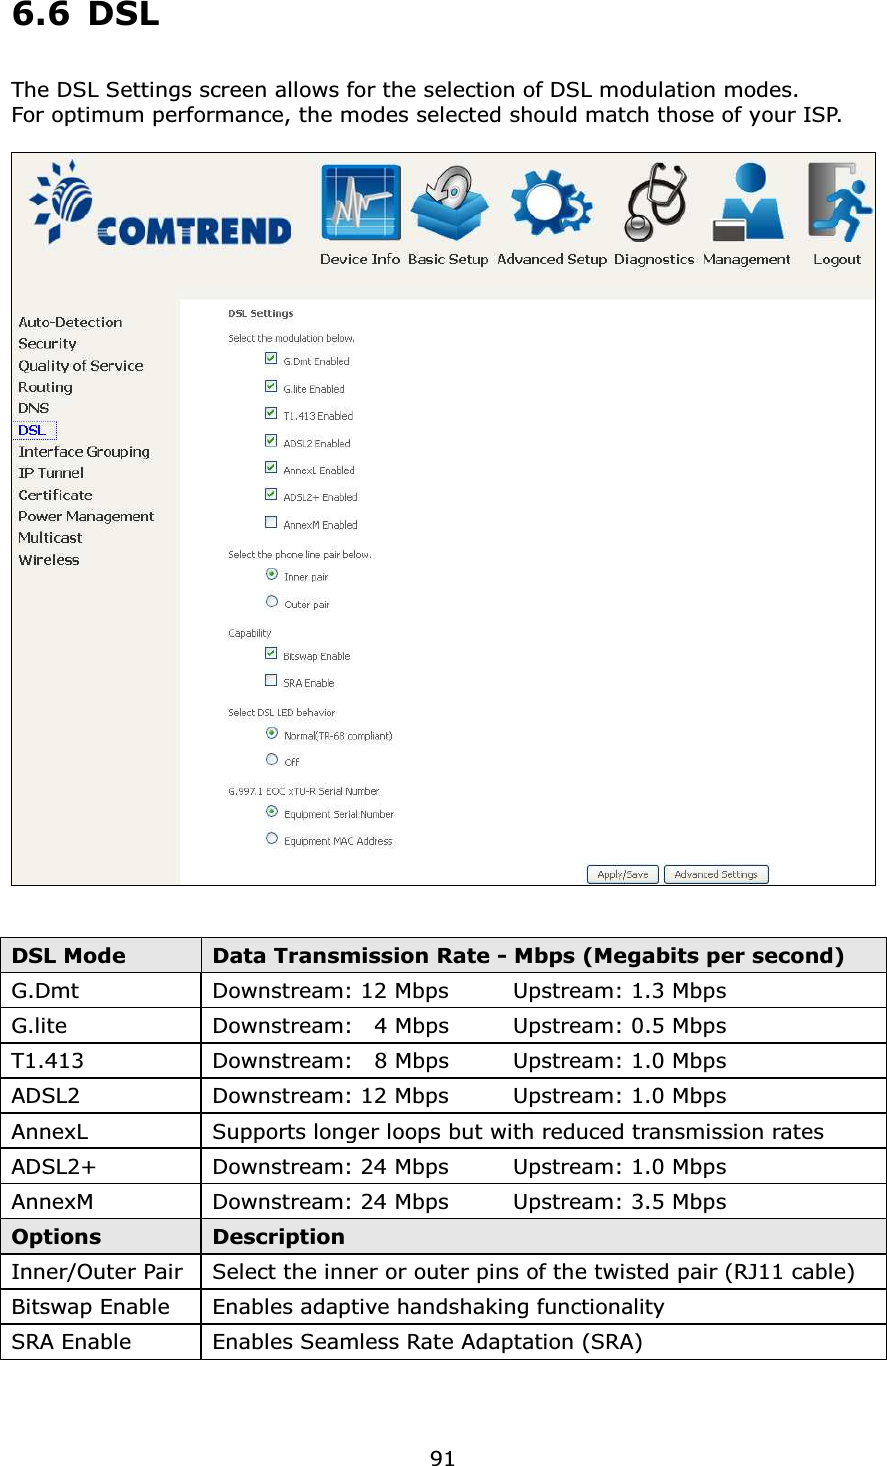  916.6 DSL  The DSL Settings screen allows for the selection of DSL modulation modes.     For optimum performance, the modes selected should match those of your ISP.     DSL Mode  Data Transmission Rate - Mbps (Megabits per second) G.Dmt  Downstream: 12 Mbps     Upstream: 1.3 Mbps G.lite  Downstream:  4 Mbps    Upstream: 0.5 Mbps T1.413  Downstream:  8 Mbps    Upstream: 1.0 Mbps ADSL2   Downstream: 12 Mbps     Upstream: 1.0 Mbps AnnexL   Supports longer loops but with reduced transmission rates ADSL2+   Downstream: 24 Mbps     Upstream: 1.0 Mbps AnnexM   Downstream: 24 Mbps     Upstream: 3.5 Mbps Options  Description Inner/Outer Pair Select the inner or outer pins of the twisted pair (RJ11 cable) Bitswap Enable  Enables adaptive handshaking functionality SRA Enable  Enables Seamless Rate Adaptation (SRA) 